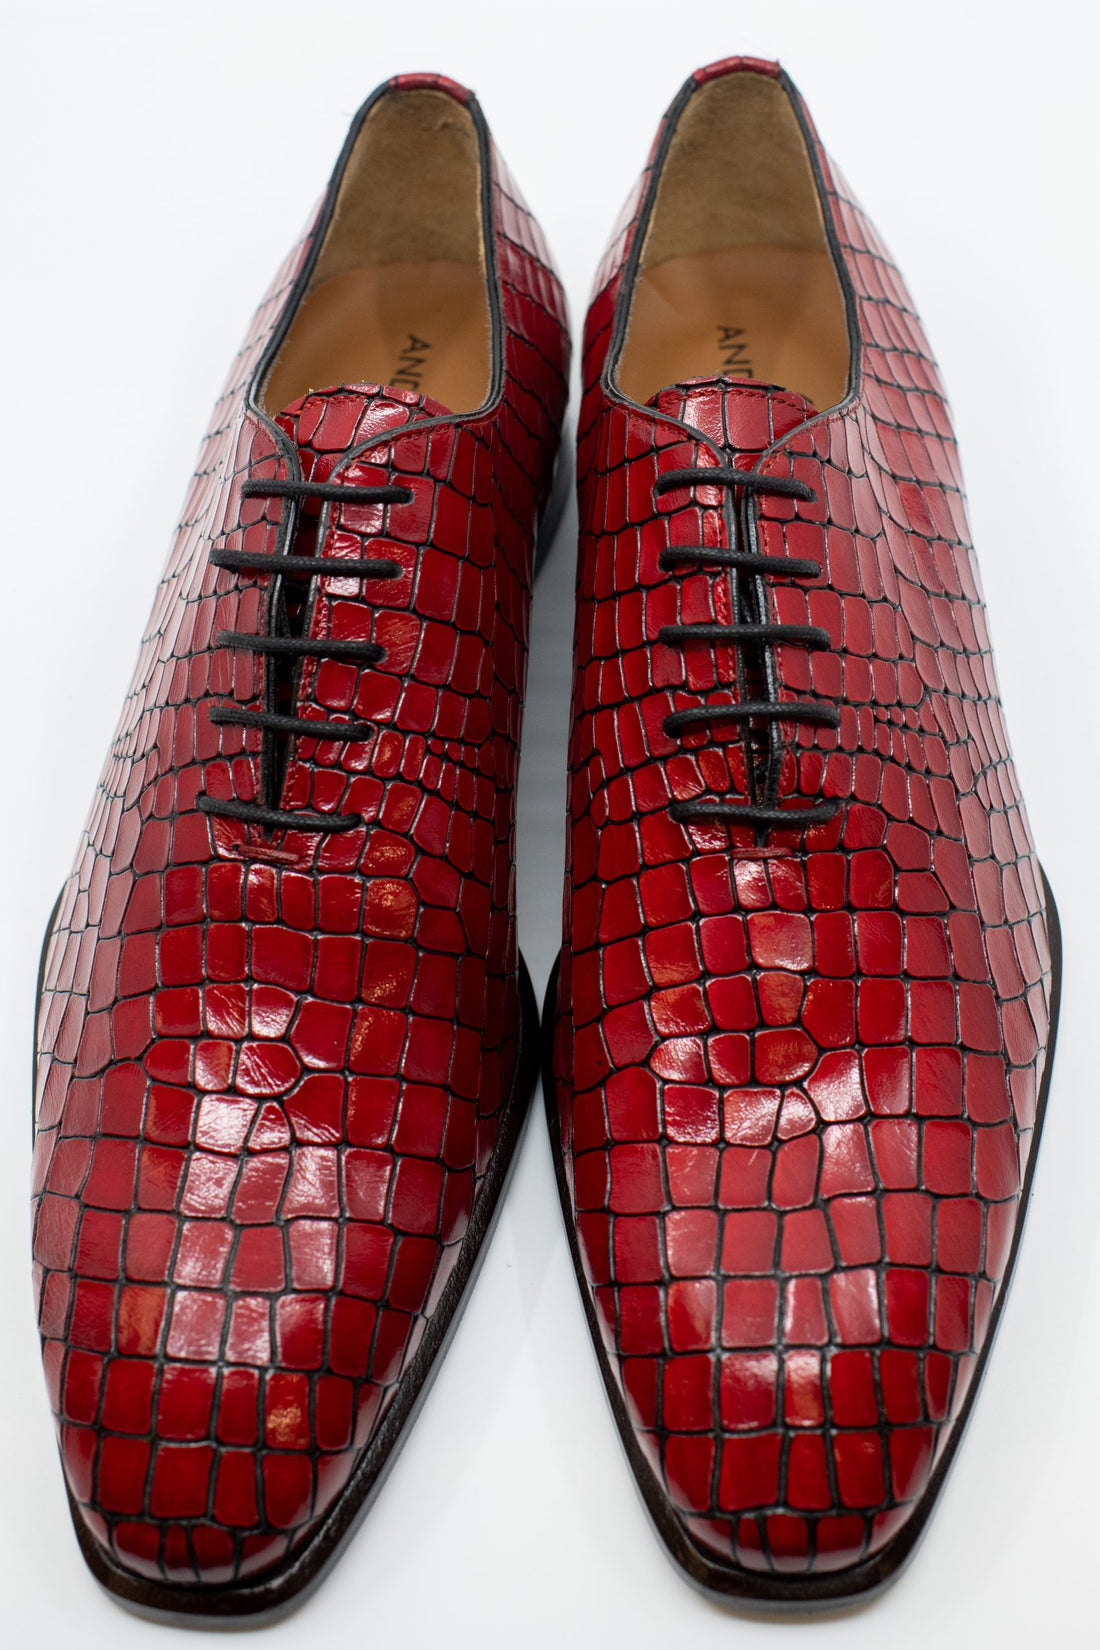 Andrea Nobile - Red croc print whole cut oxford laced dress shoes